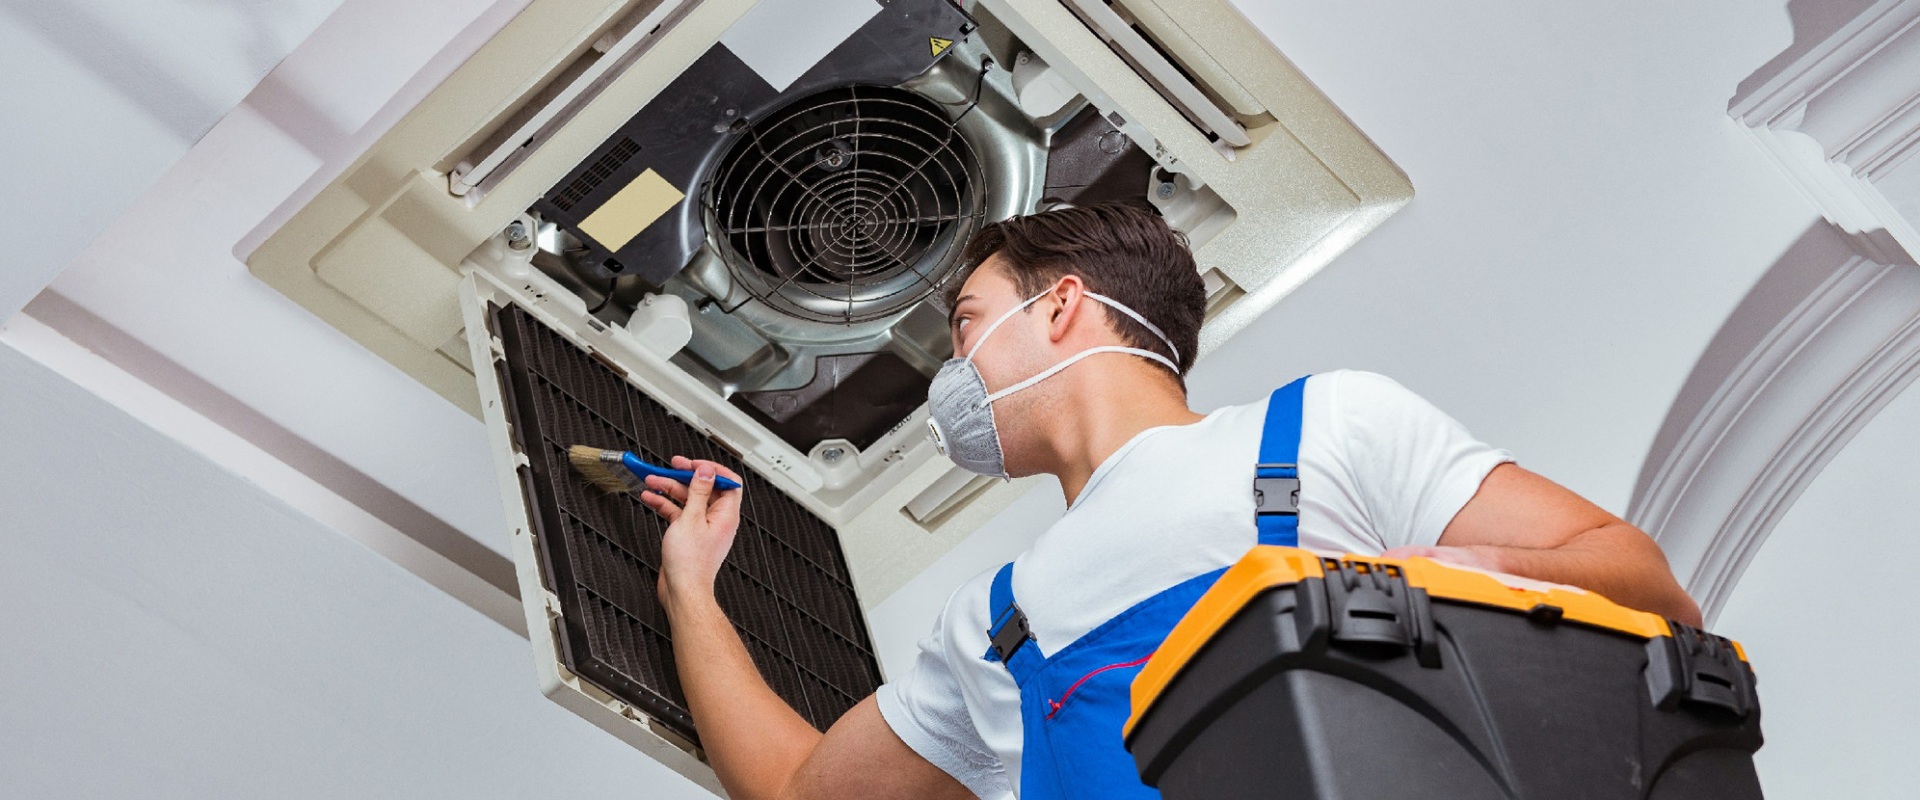 Finding Professional Duct Repair Services in Miami Shores, Florida